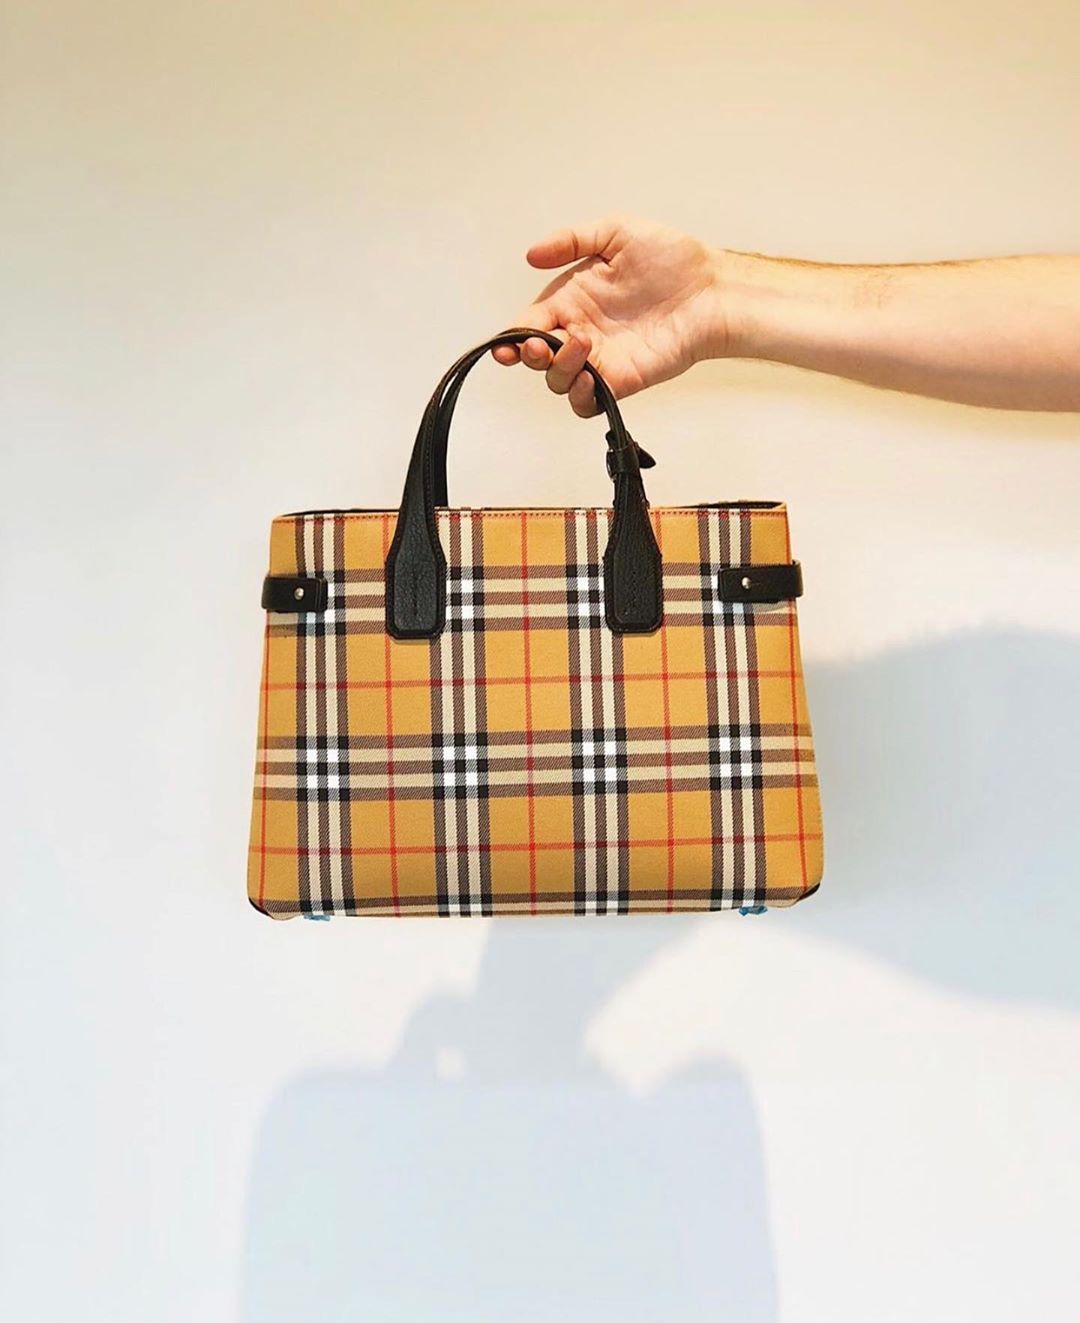  — #BURBERRY MEDIUM #BANNER BAG IN VINTAGE CHECK AND...